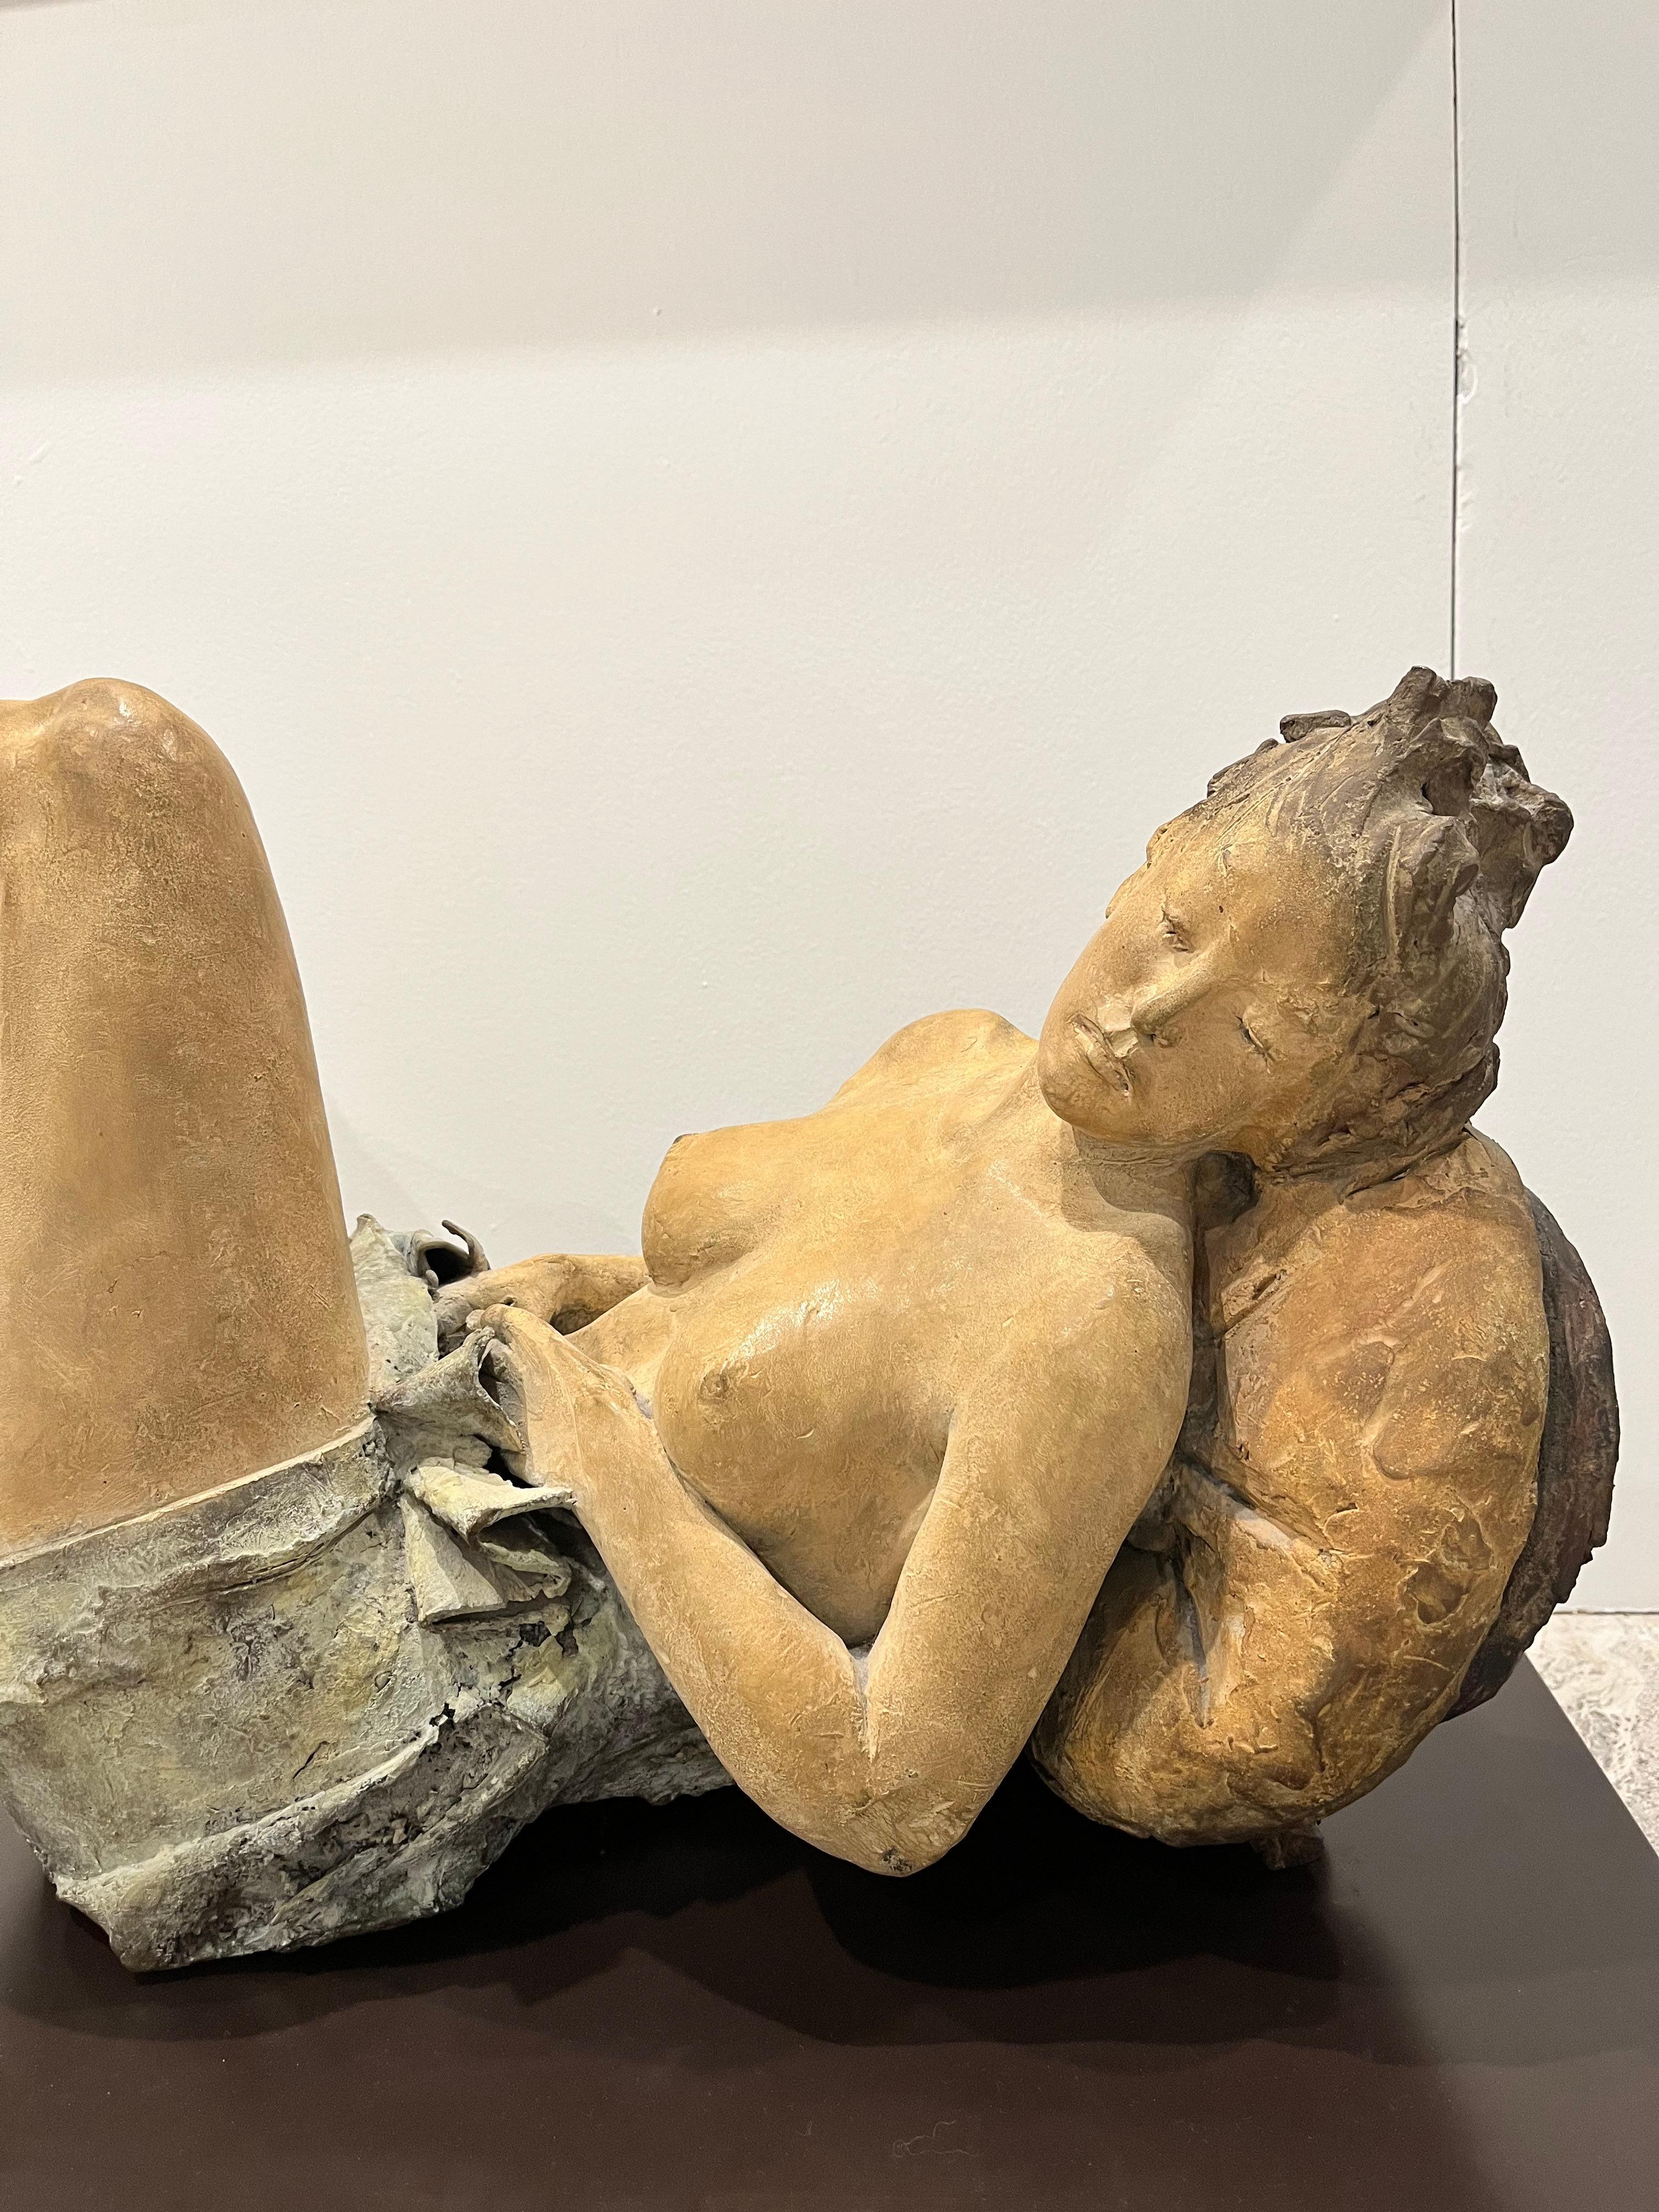 Fine beauty female nude sculpture in bronze, patina ochre and azur, dust blue - Realist Sculpture by Ugo Riva